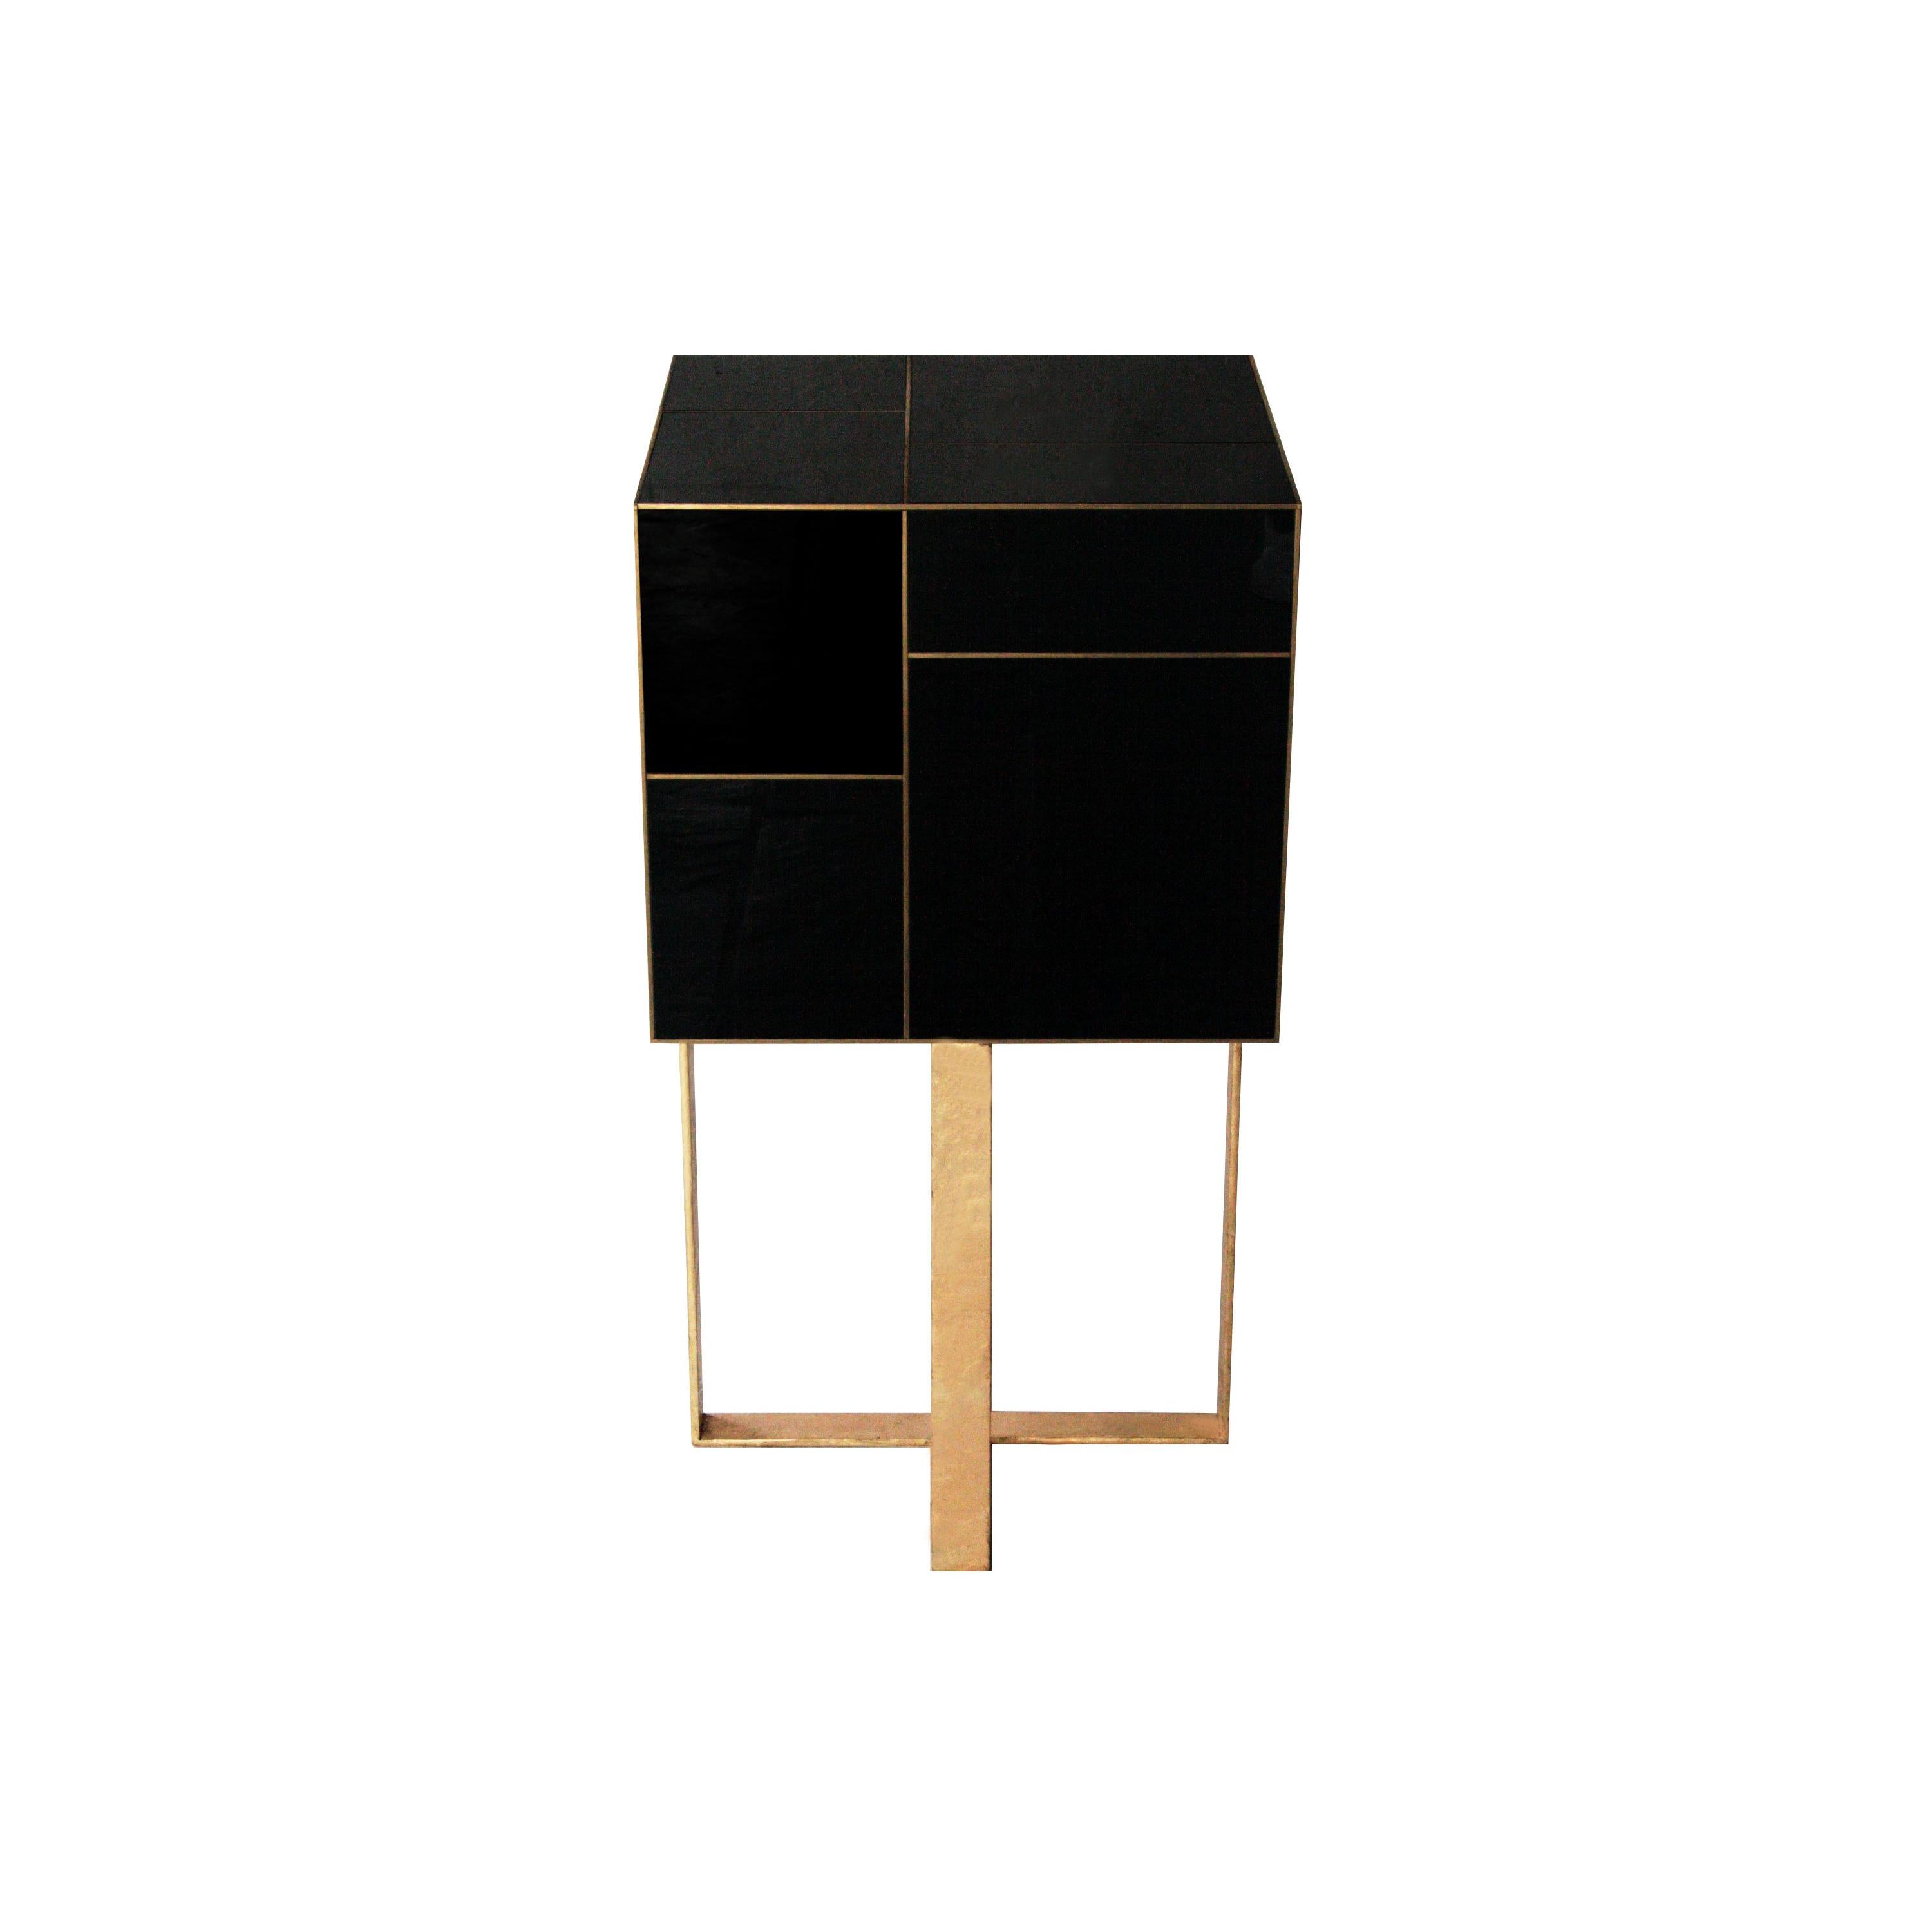 Contemporary Cube Black Gold Metal Wood Crystal Spanish Auxiliar Table, 2016